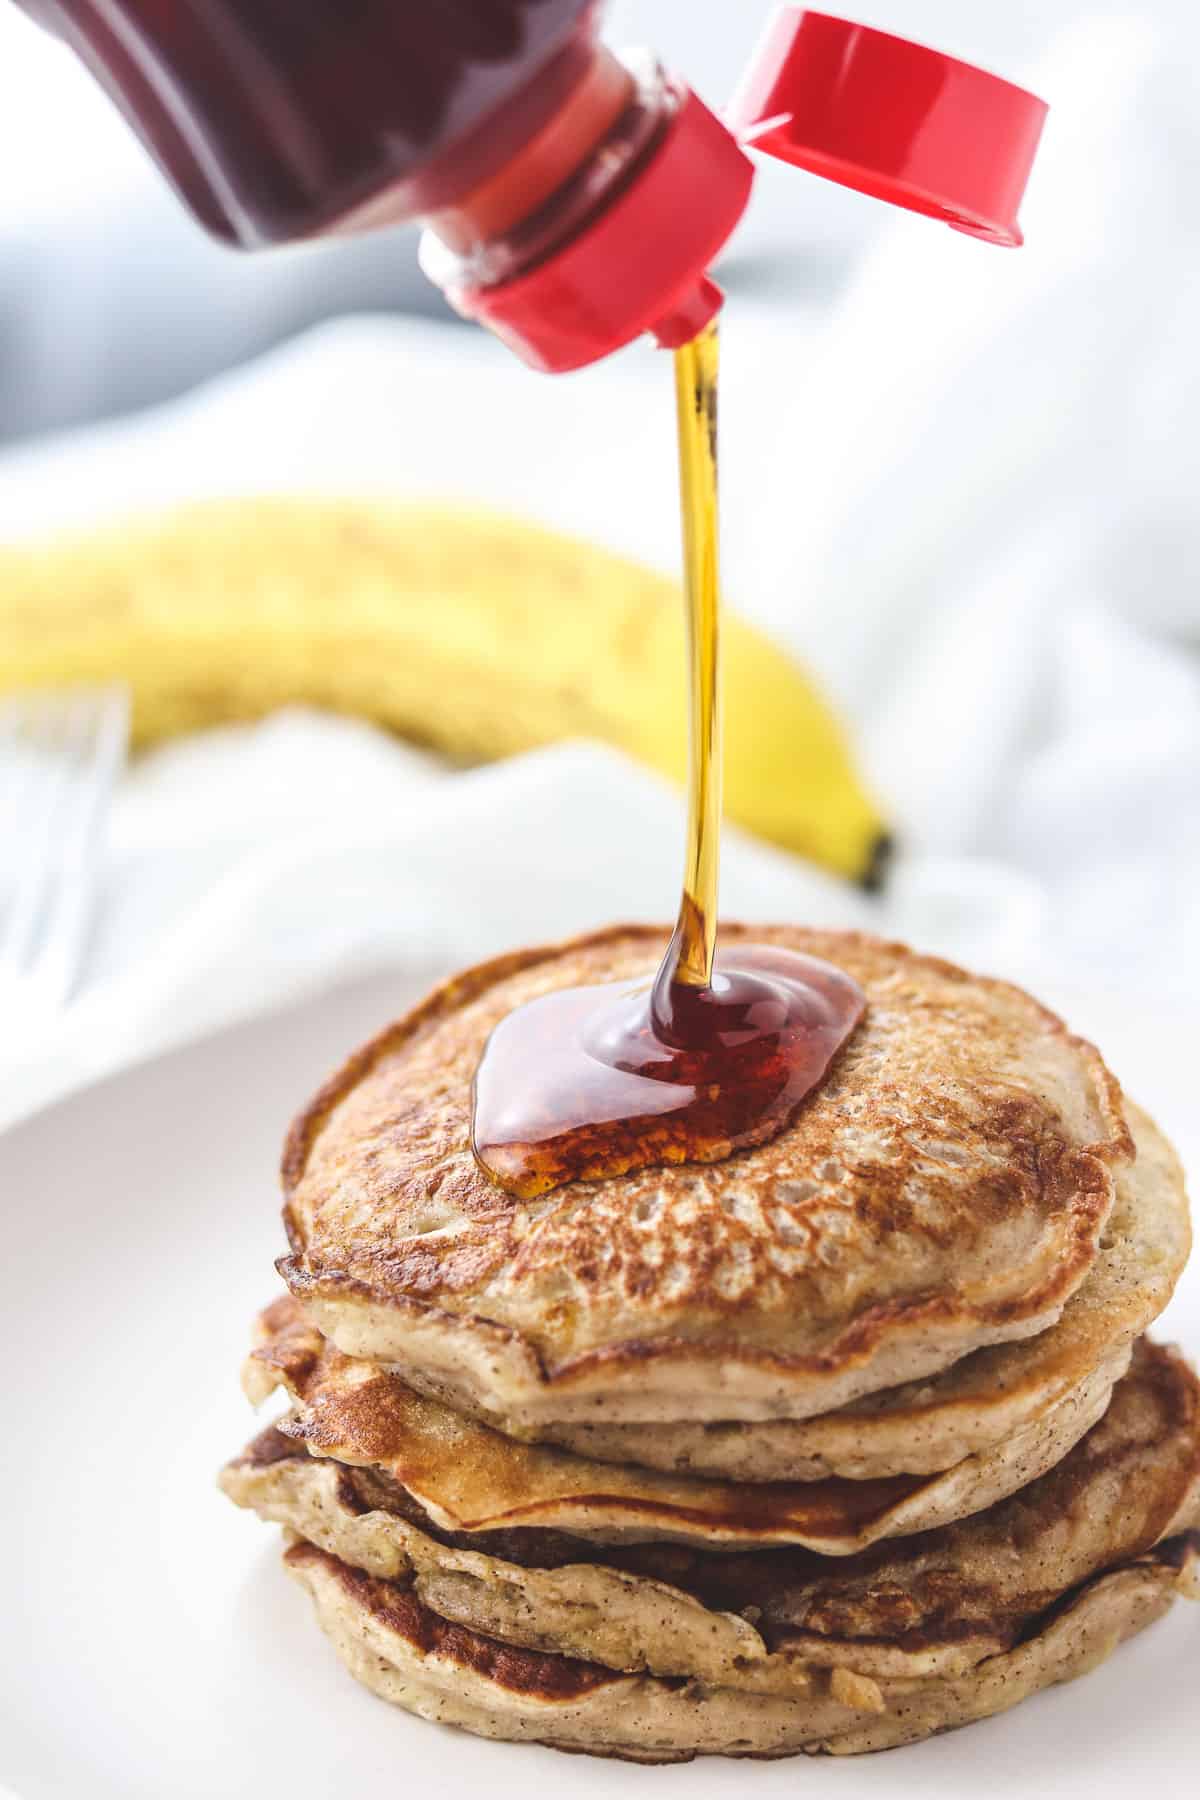 pouring syrup on a stack of low calorie pancakes